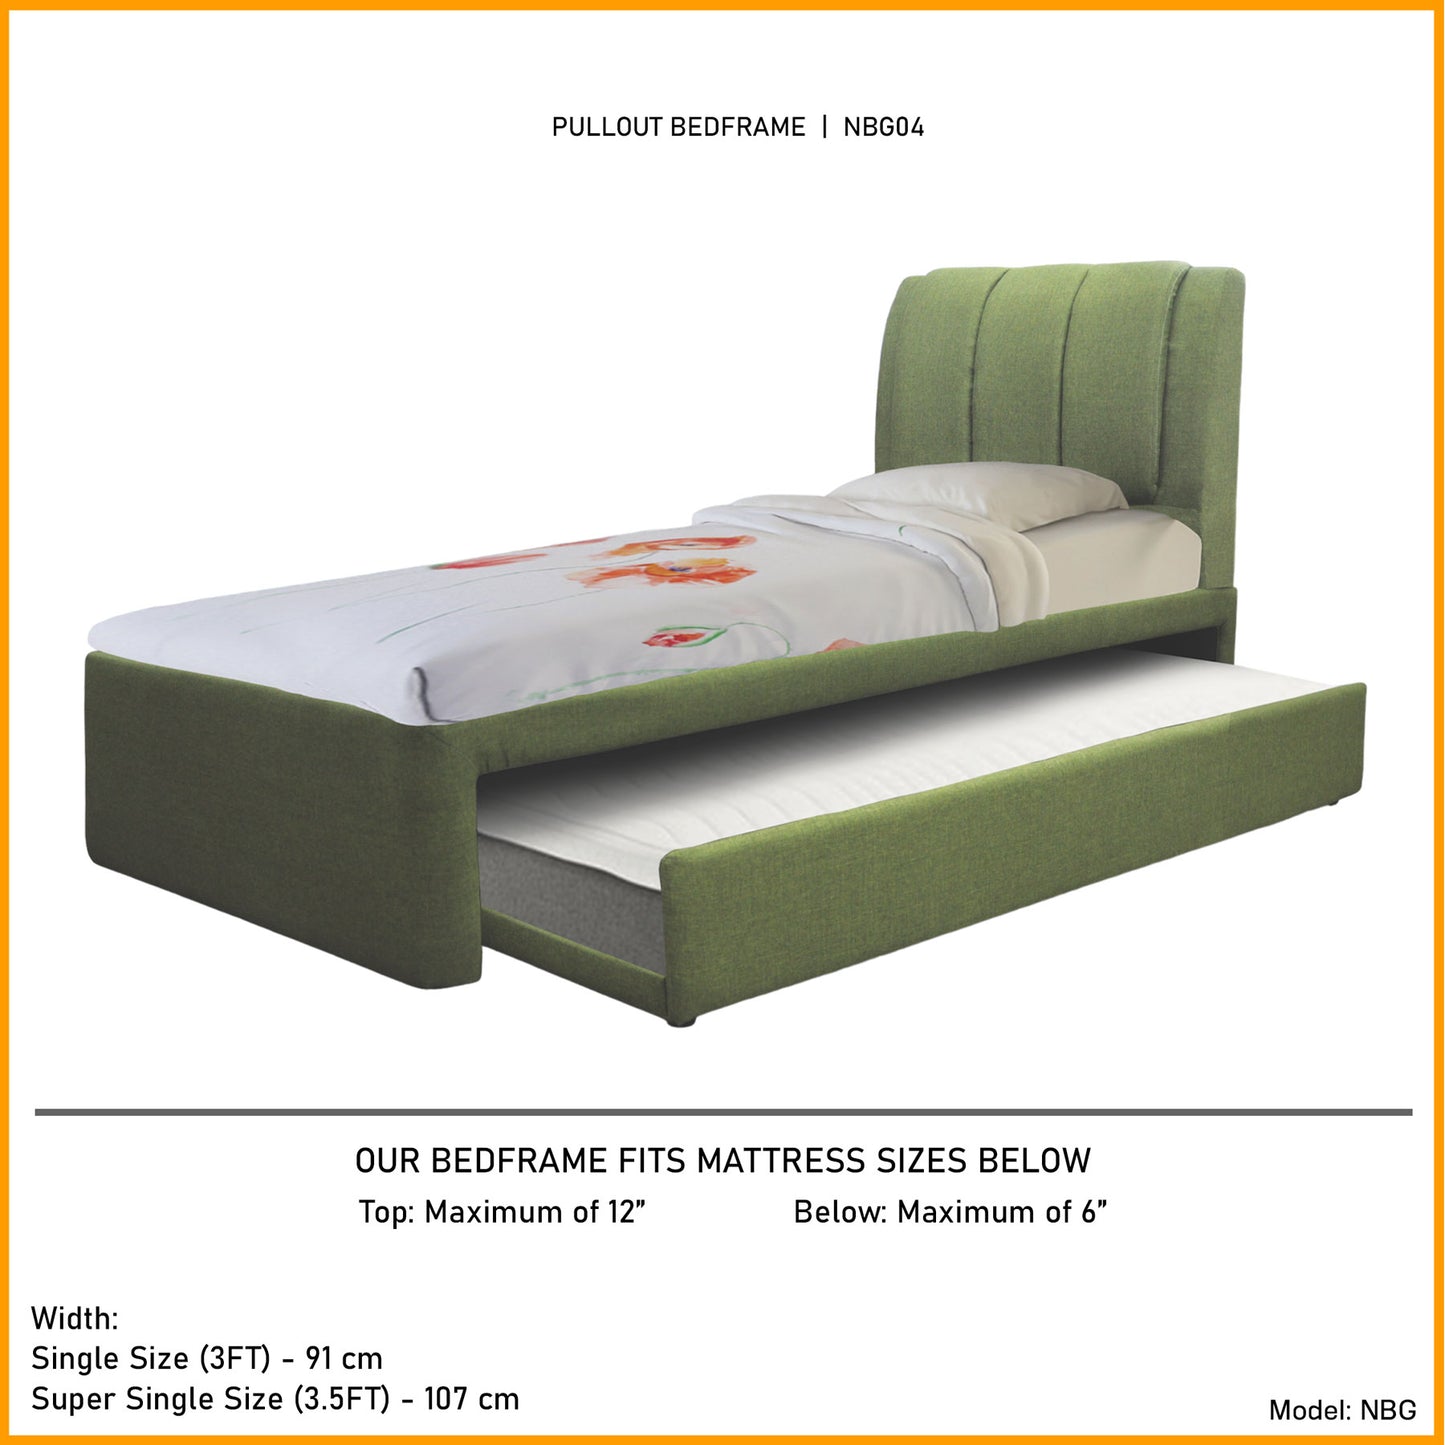 Pullout Bedframe 3in1 with Foam Mattress | NBG04